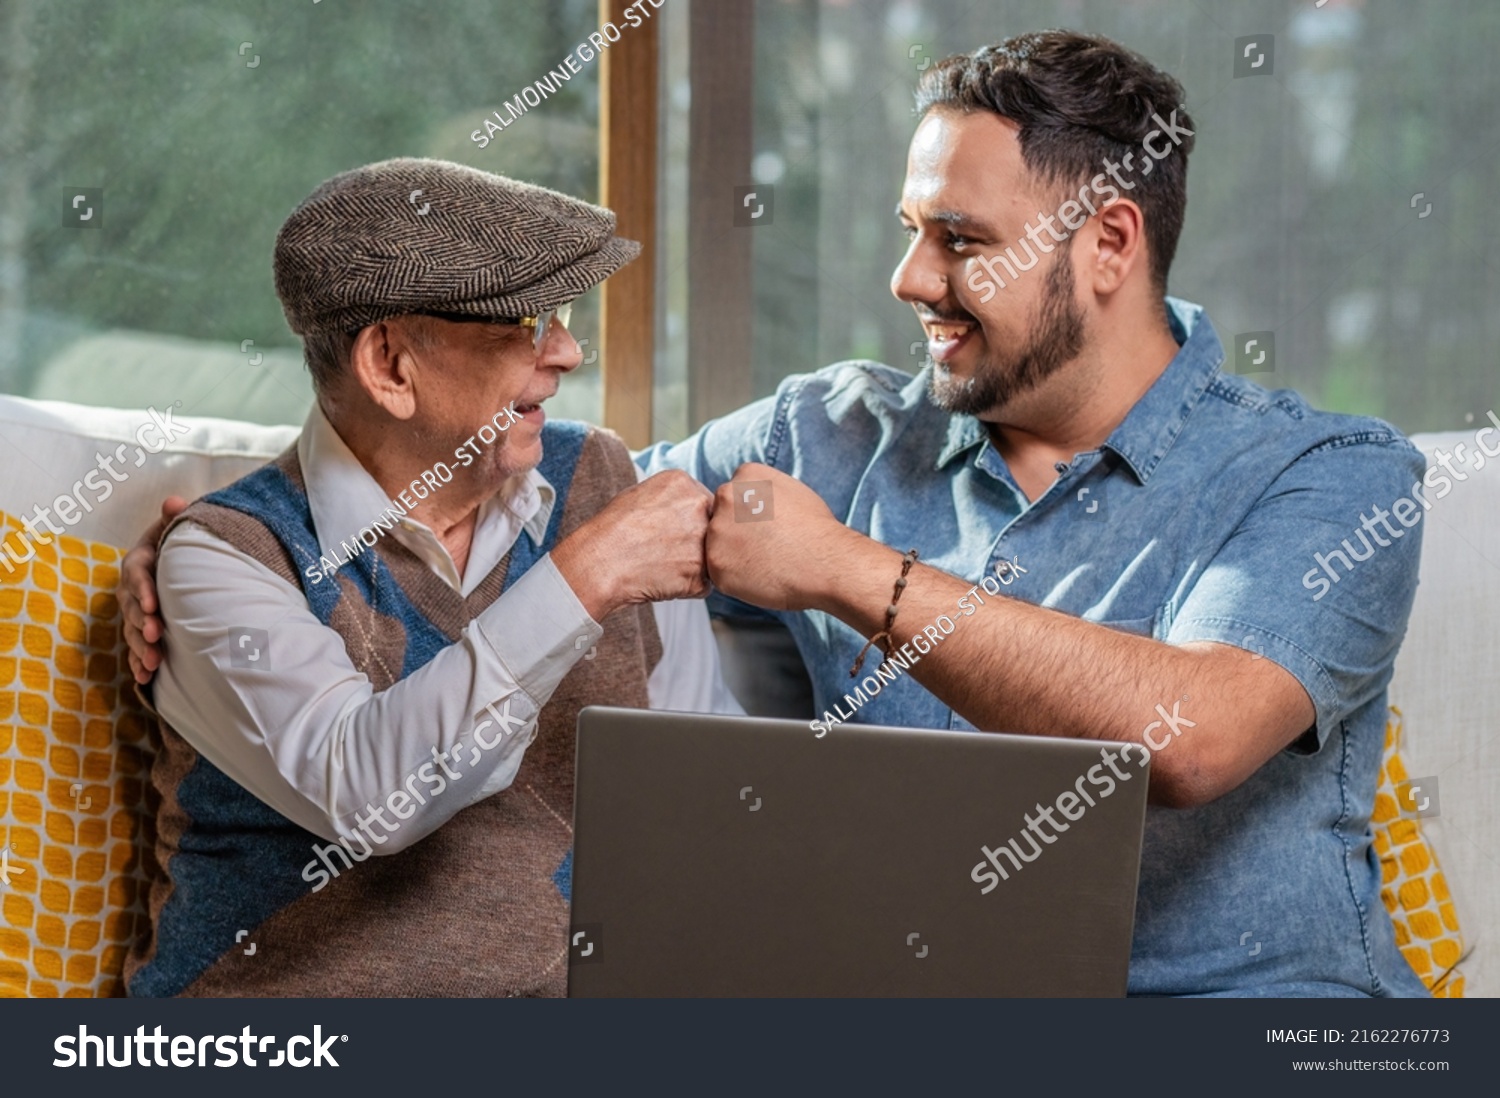 Happy adult senior father with his adult son. Young man enjoys teaching his older father how to use a laptop. How to use technology. #2162276773